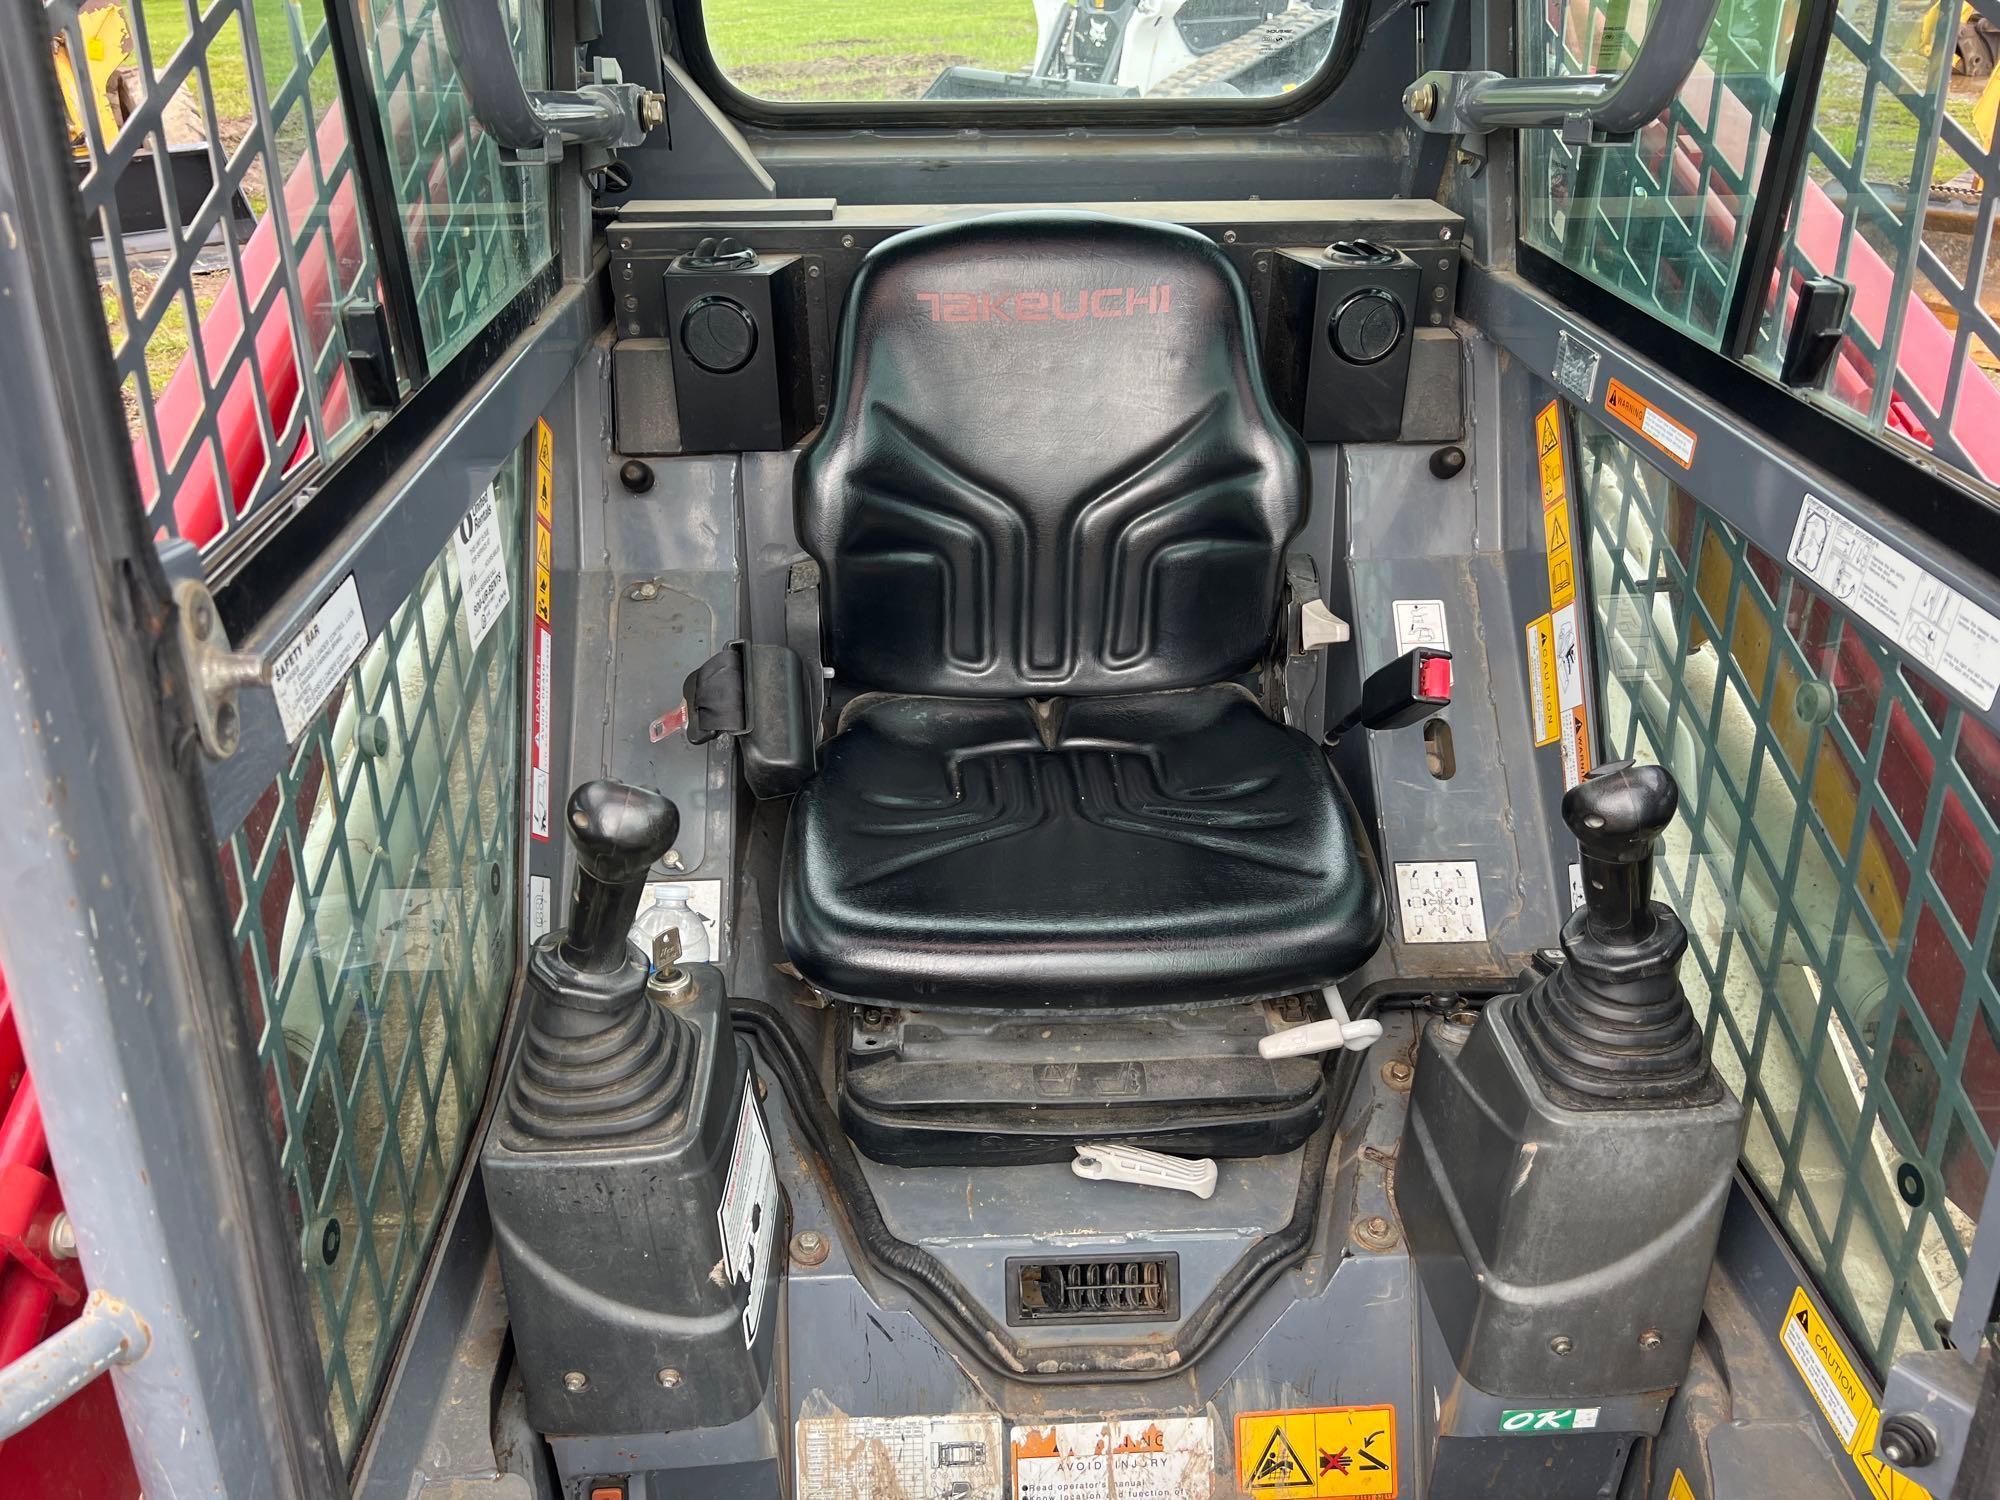 2018 TAKEUCHI TL6CR RUBBER TRACKED SKID STEER SN:406000196 powered by diesel engine, equipped with